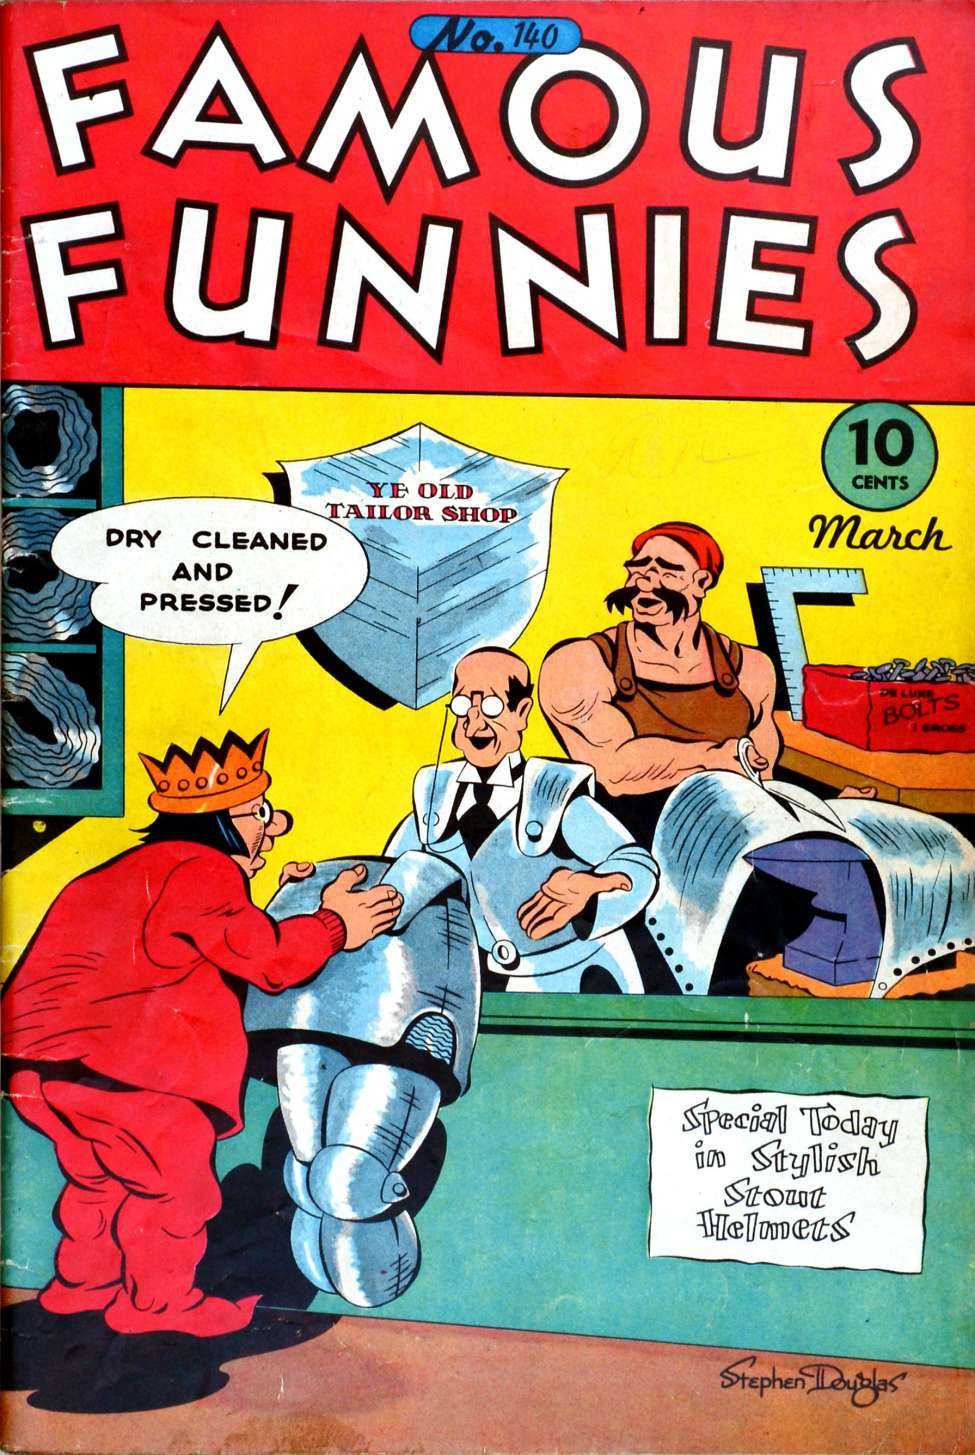 Comic Book Cover For Famous Funnies 140 - Version 1